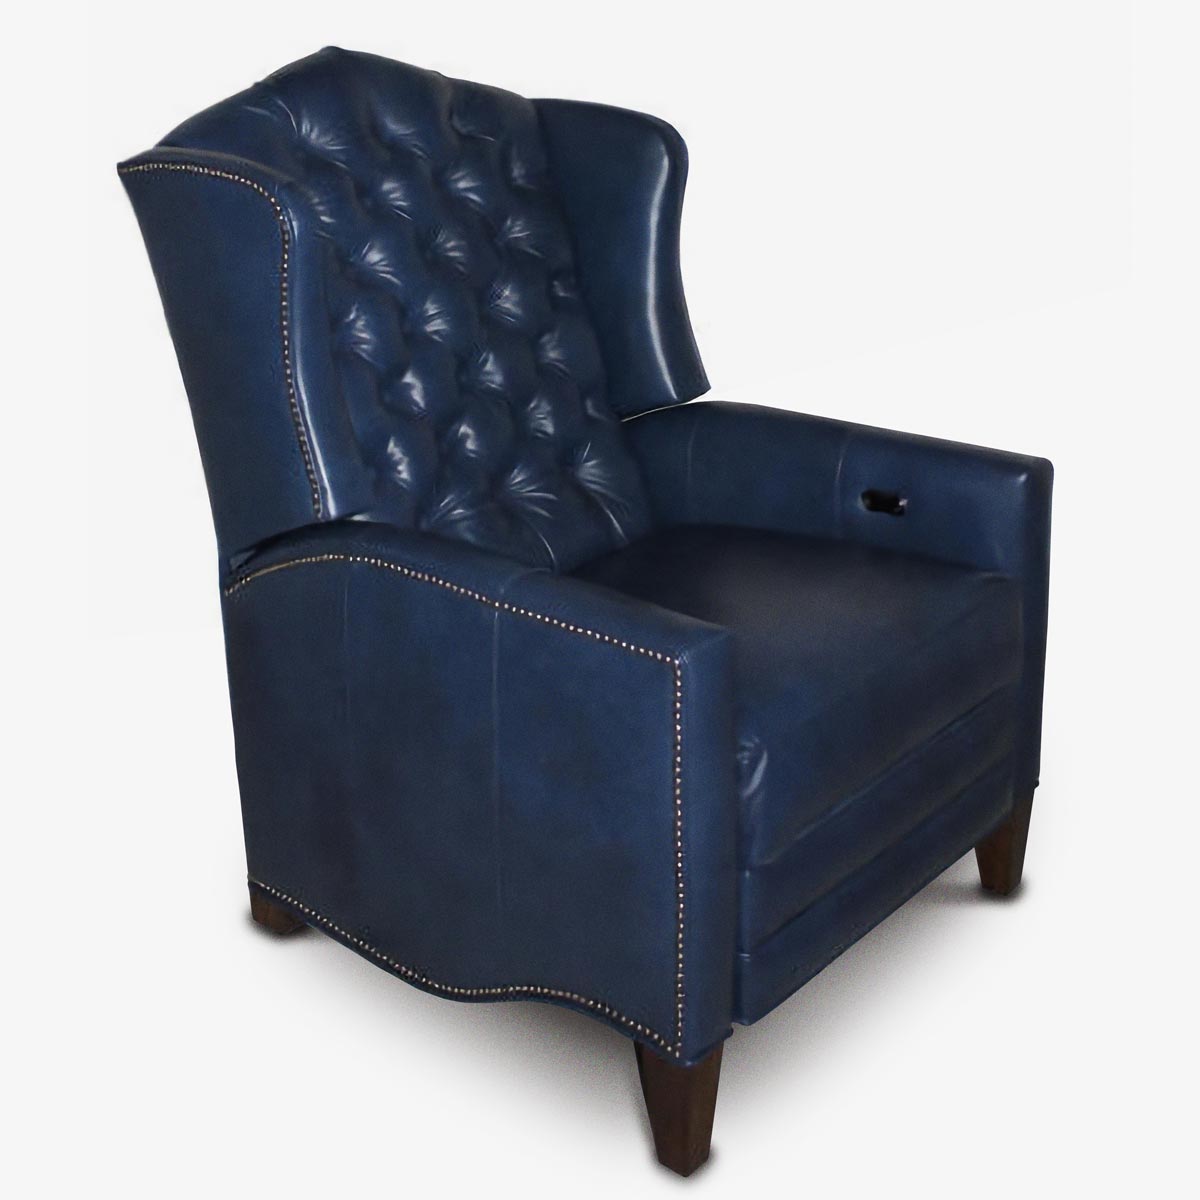 The Thomas: American Made Recliner